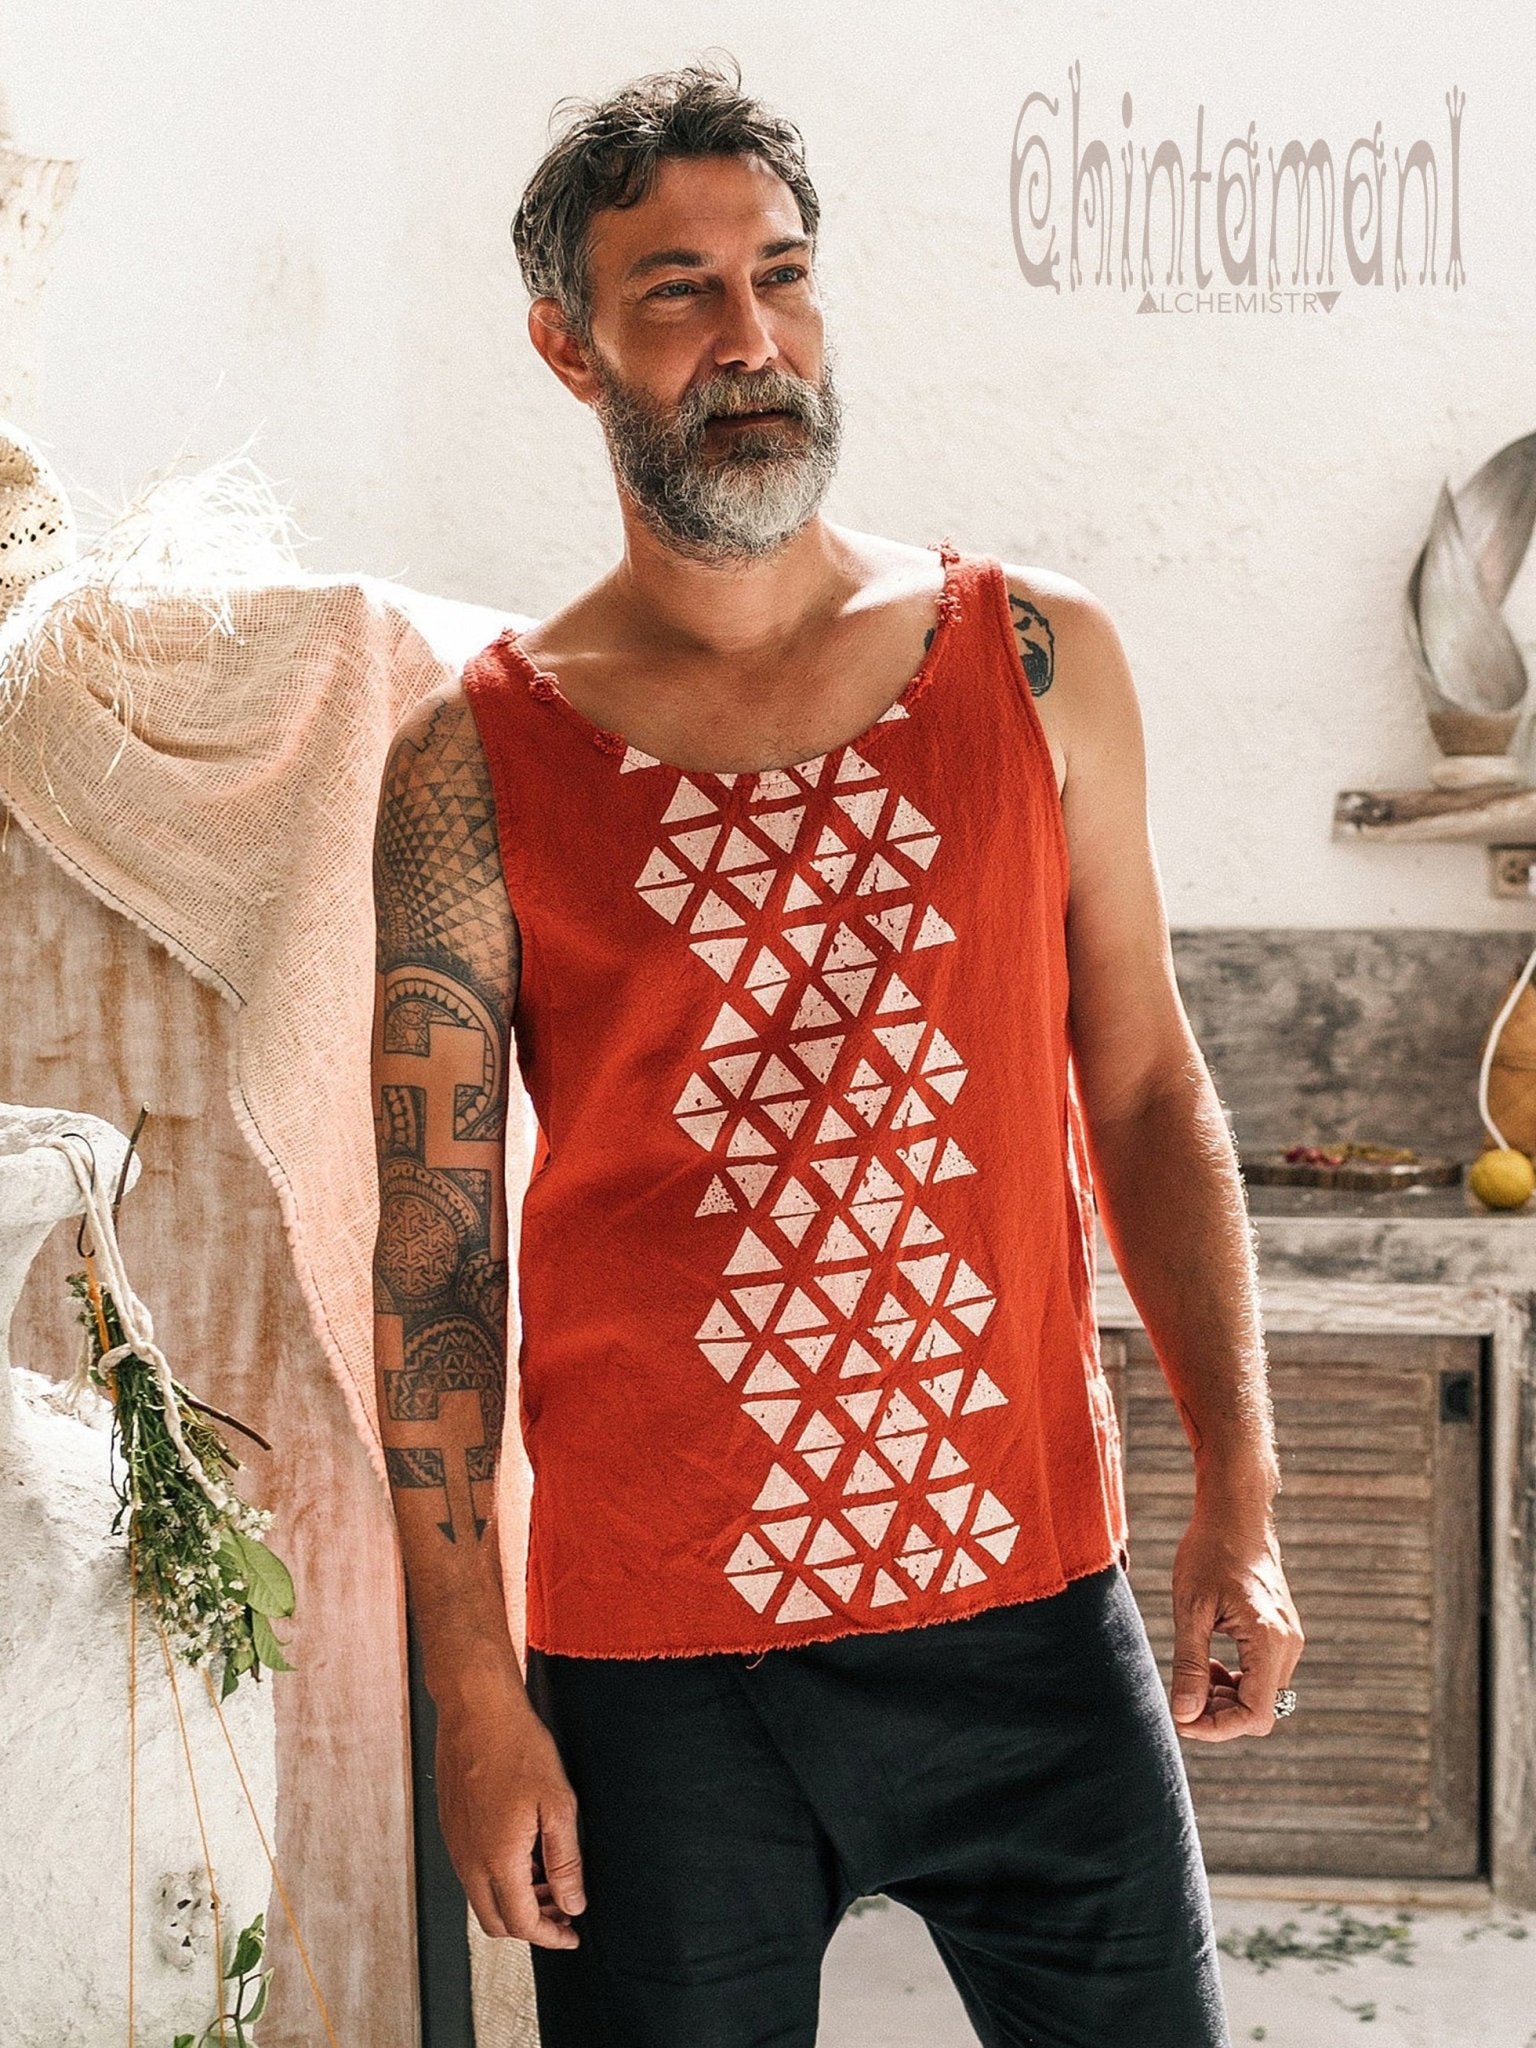 Nomad Cotton Men Tank Top / – Screen ChintamaniAlchemi with Ochre for Red Print Geometric